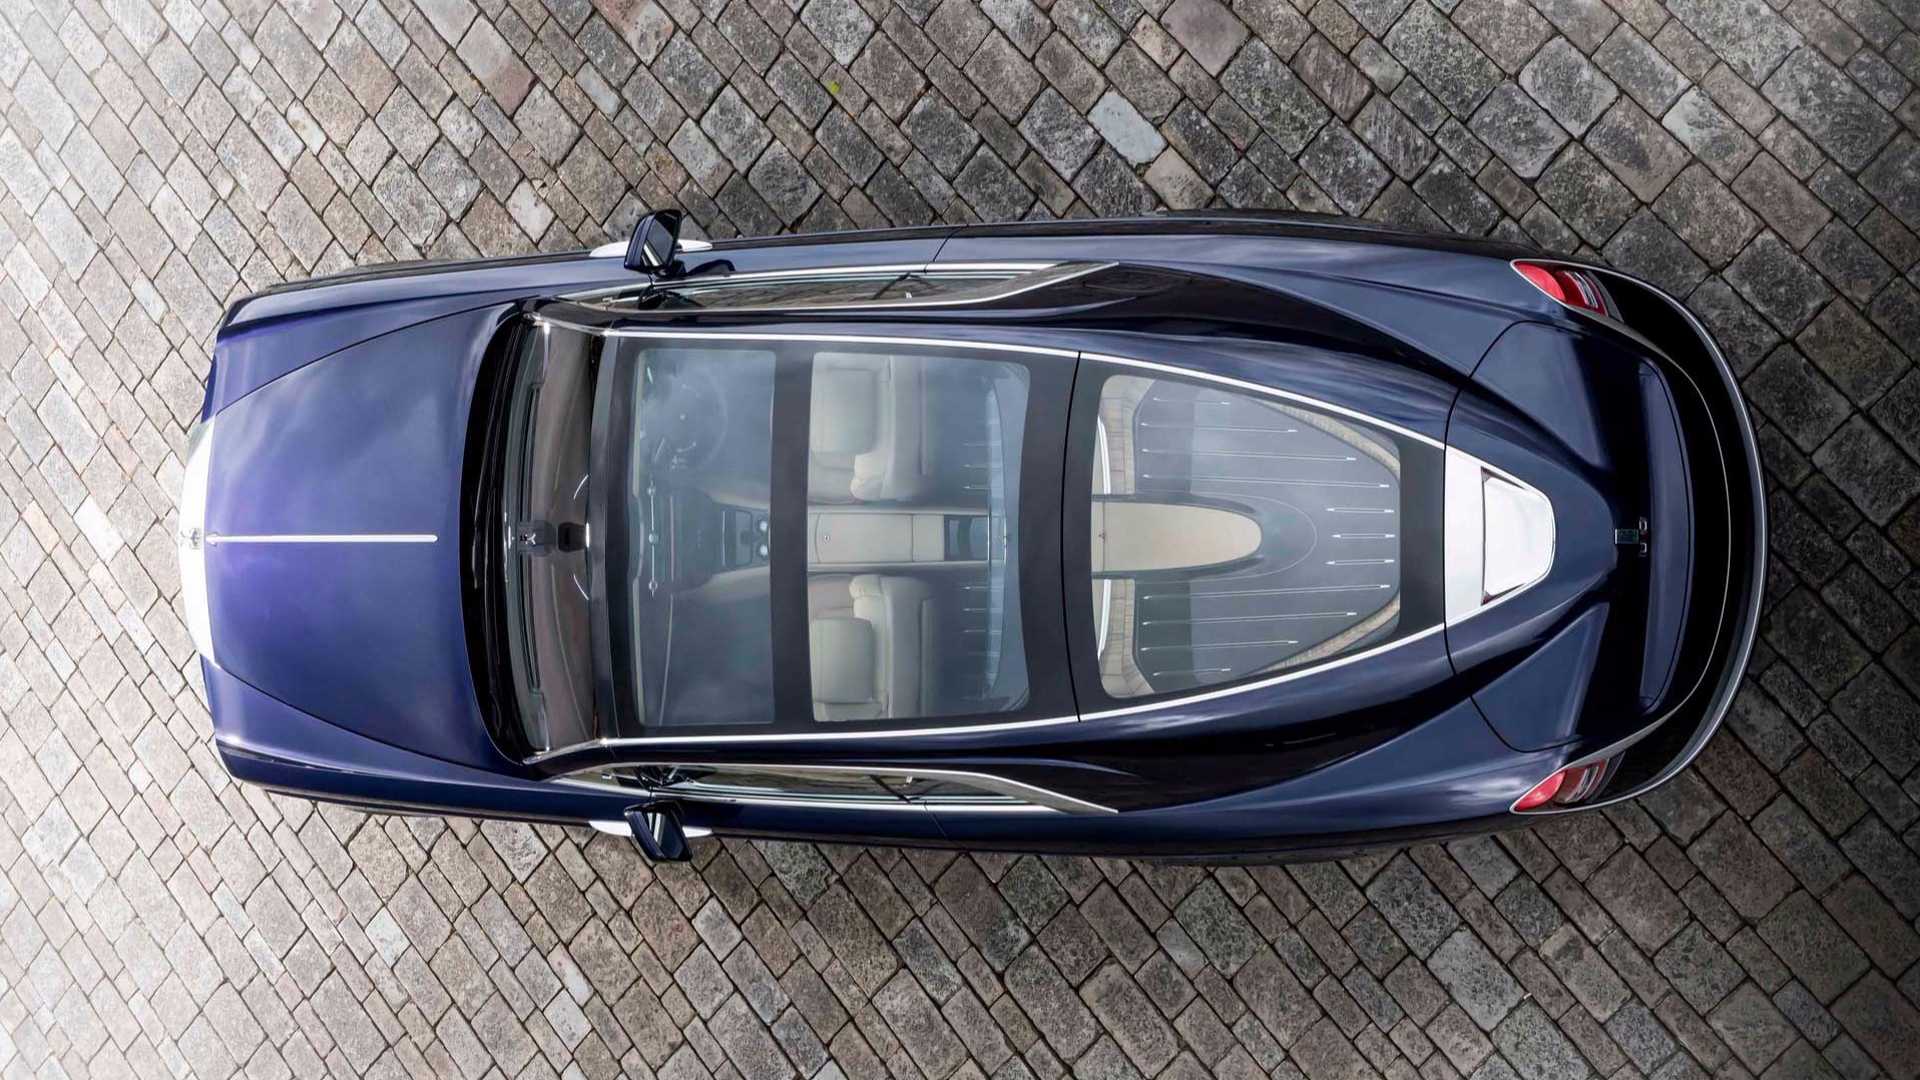 Rolls Royce Builds Bespoke Sweptail And It's Positively Glorious